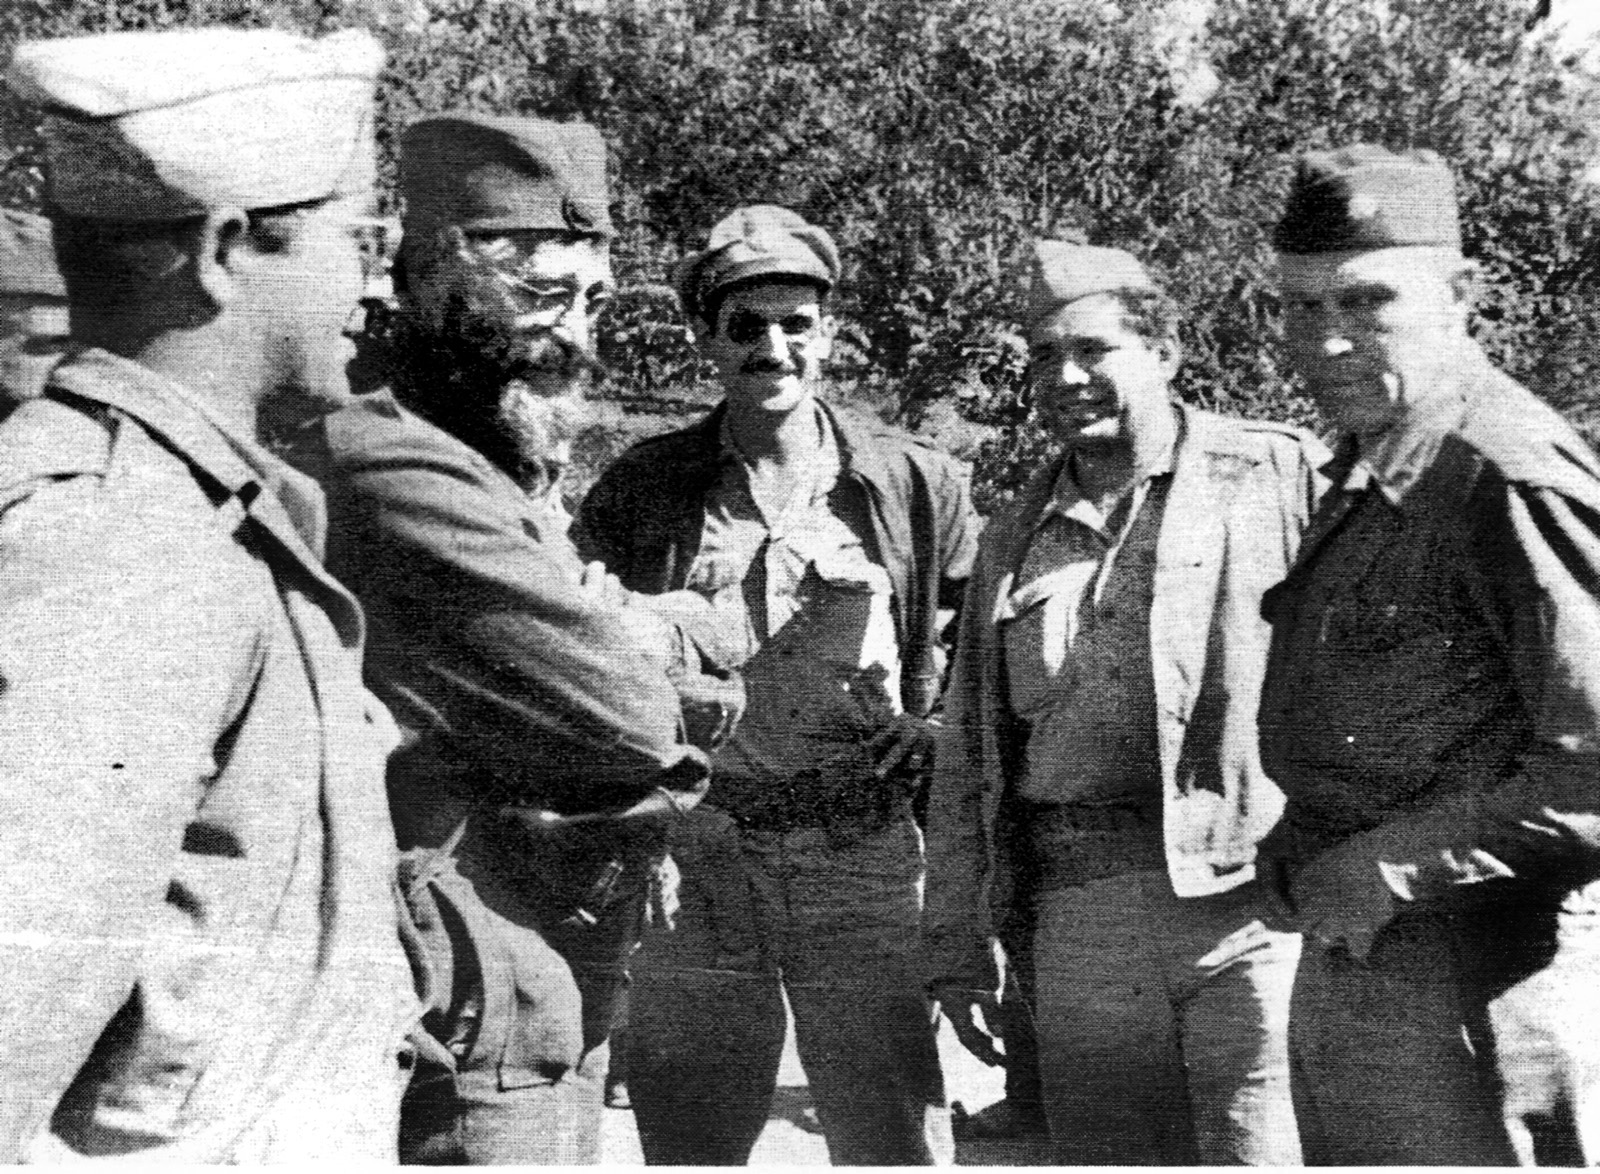 The OSS operations team and its Chetnik partners that successfully accomplished the rescue of many downed American airmen in Yugoslavia during Operations Halyard and Ranger included, left to right, Michael Rajacich, Drazha Mihailovich, Nick Lalich, George Musulin, and Robert McDowell. OSS member George Vujnovich took the photo. 